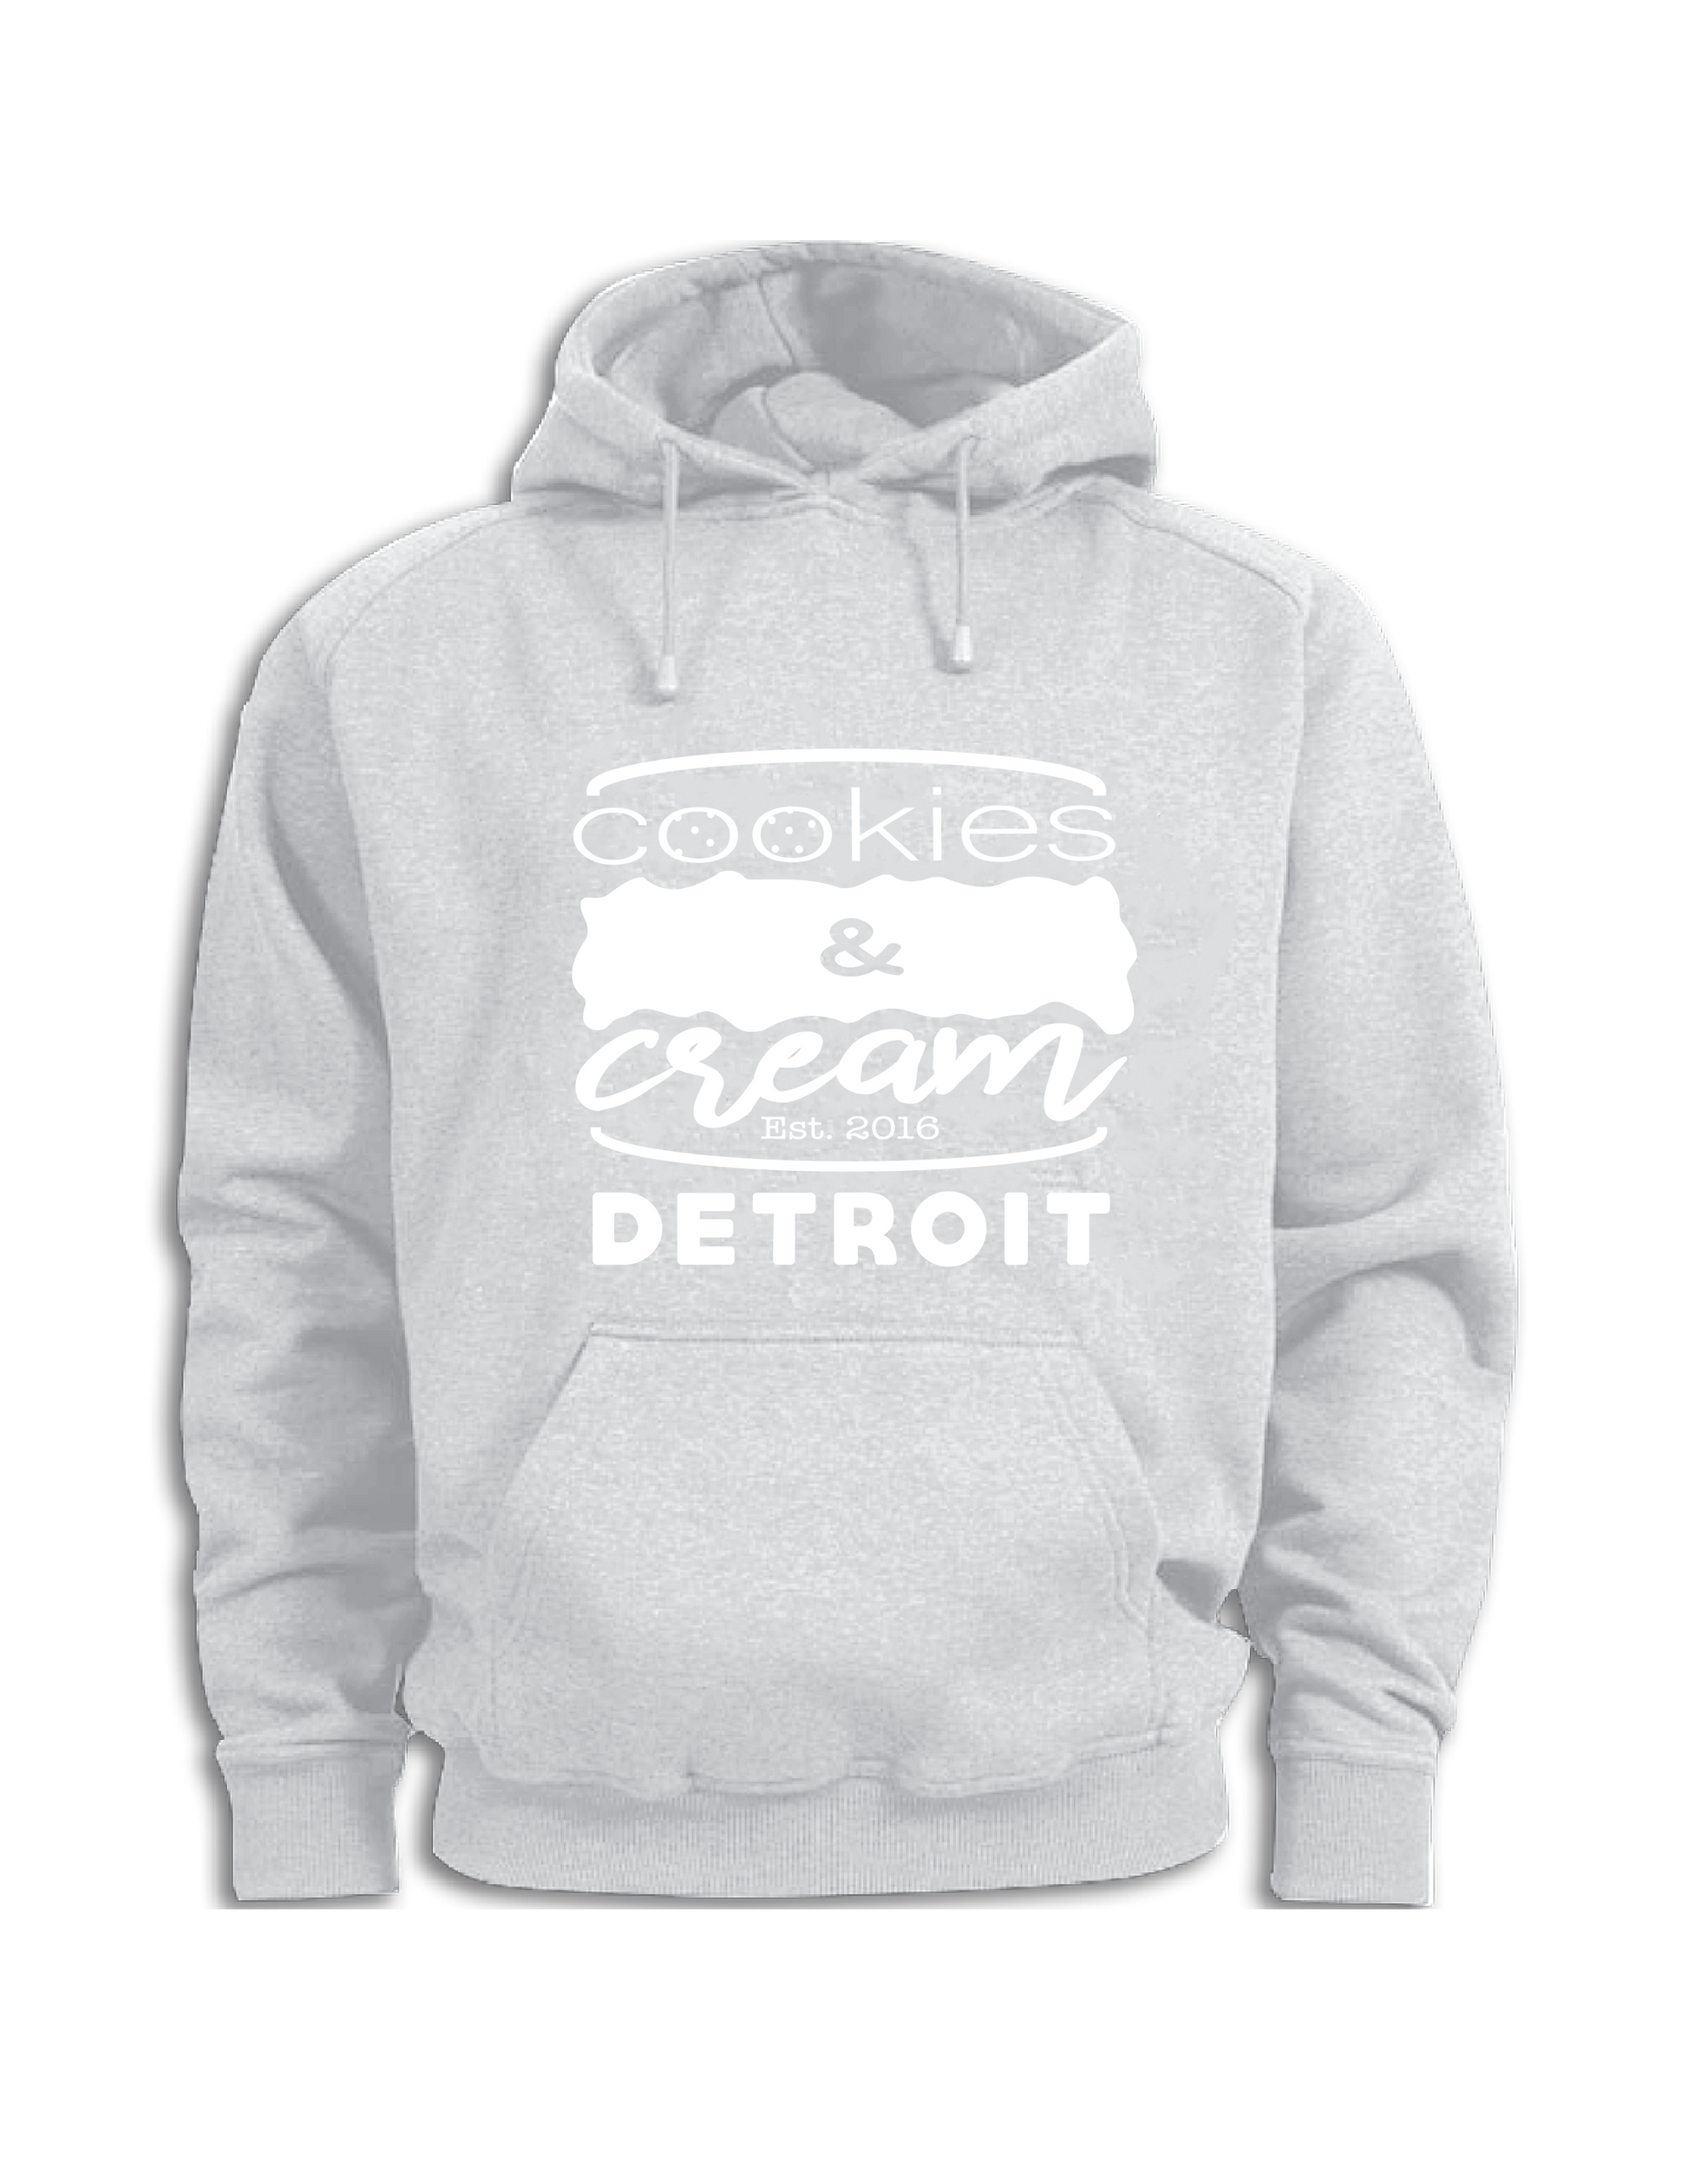 Authentic Cookies and Cream Detroit Gear!! Super soft and comfy Hoodies that will keep you warm and cool at the same time. Just like a Cream Bun!! 